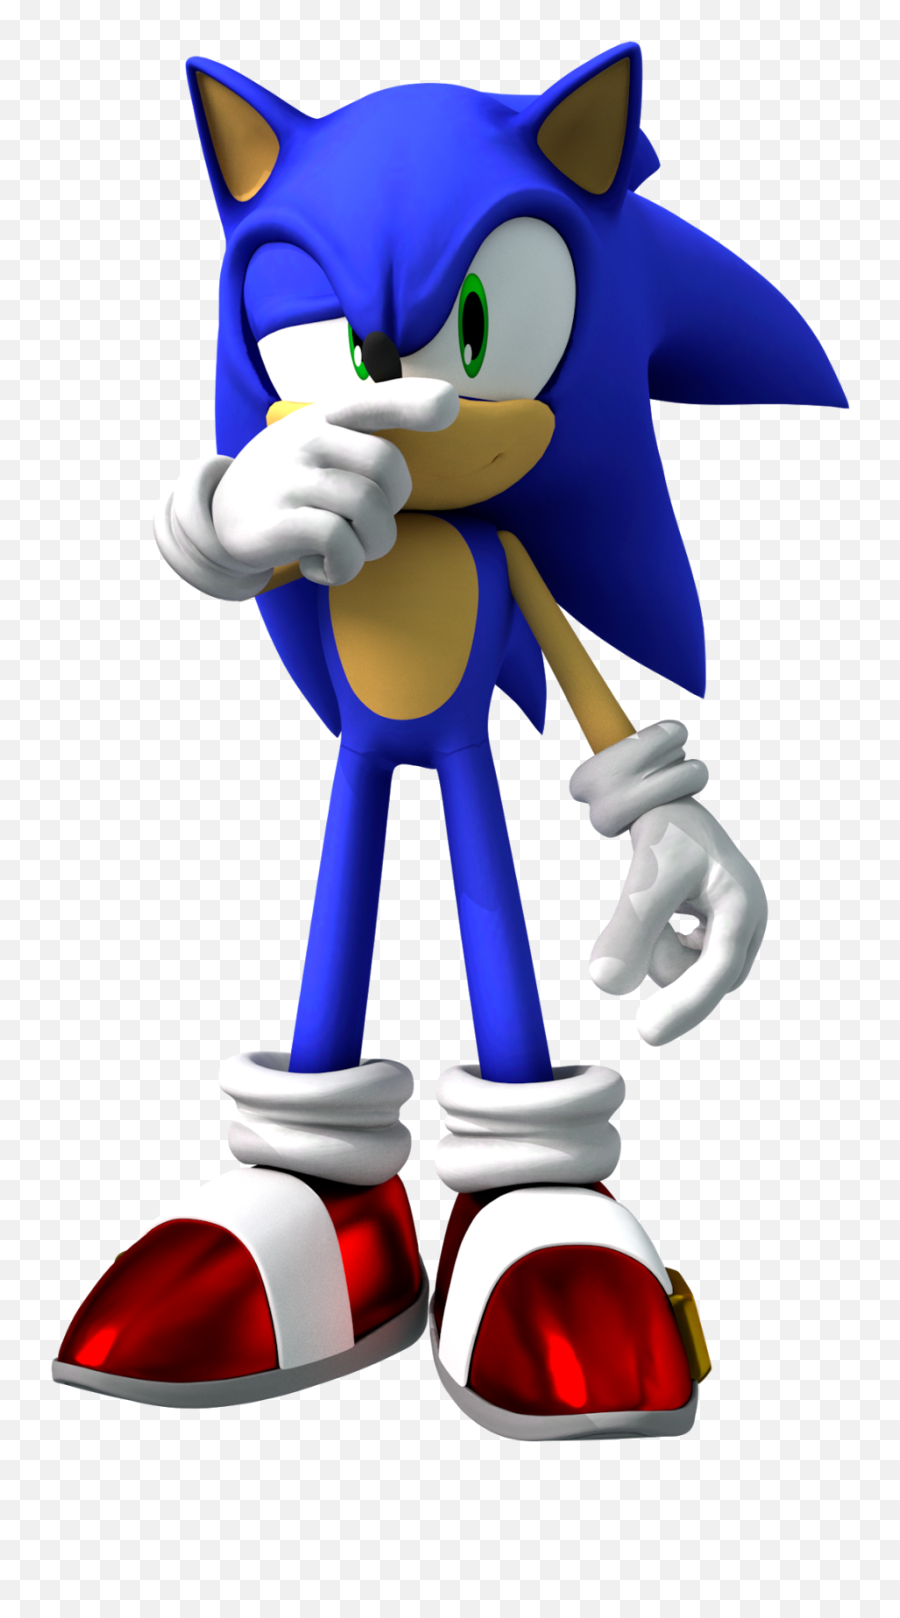 Download Sonic The Hedgehog Png Photo - Sonic The Hedgehog Transparent,Sonic The Hedgehog Transparent